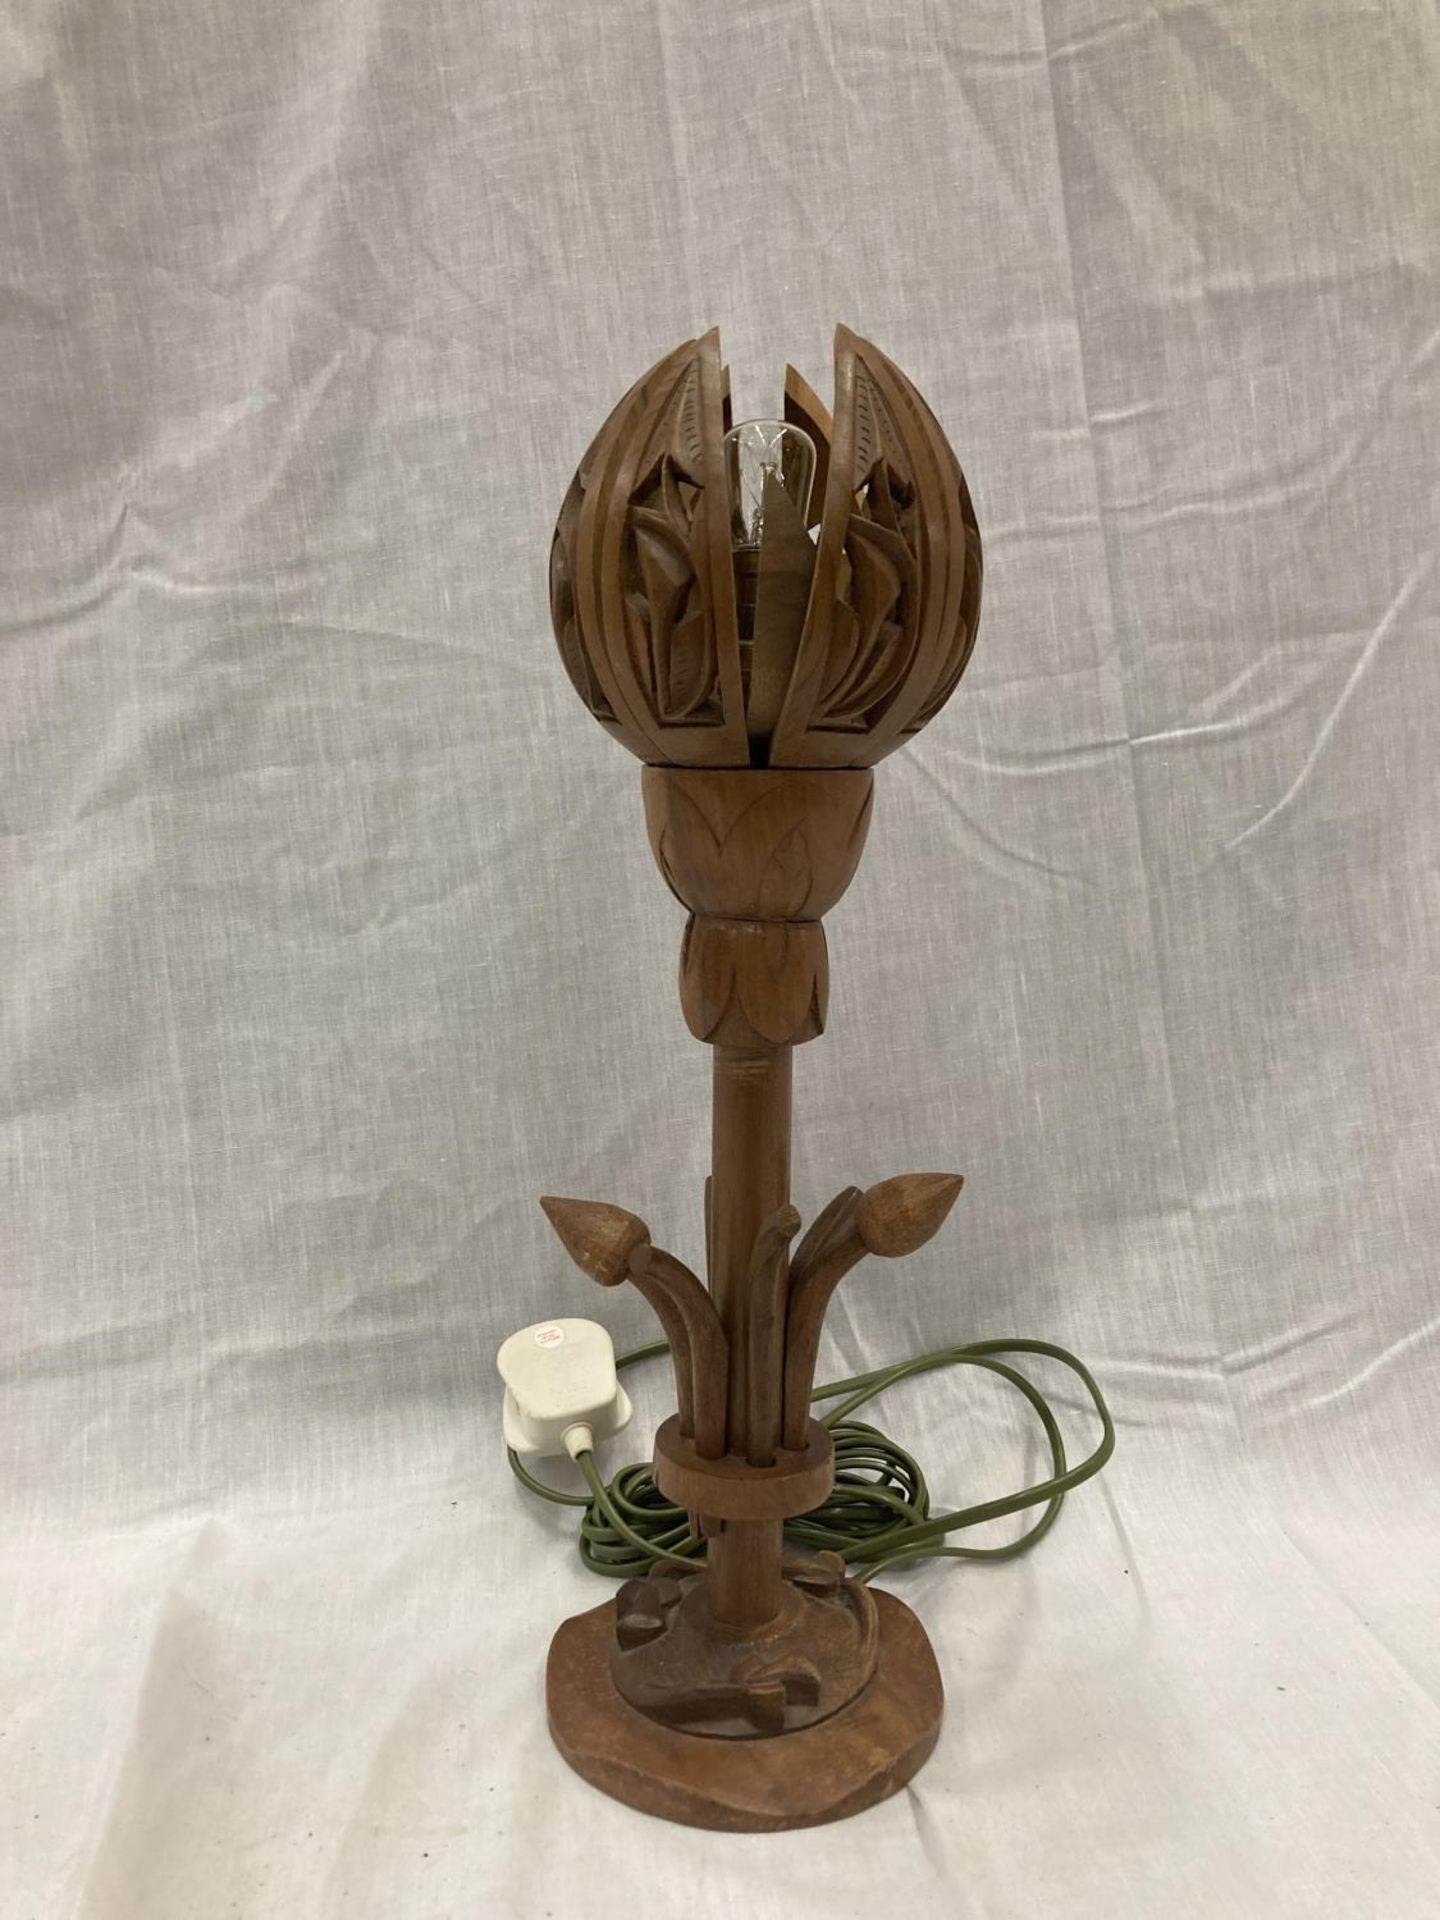 AN ARTS & CRAFTS STYLE WALNUT LOTUS FLOWER LAMP WHICH TURNS TO REVEAL THE FLOWER, IN WORKING ORDER